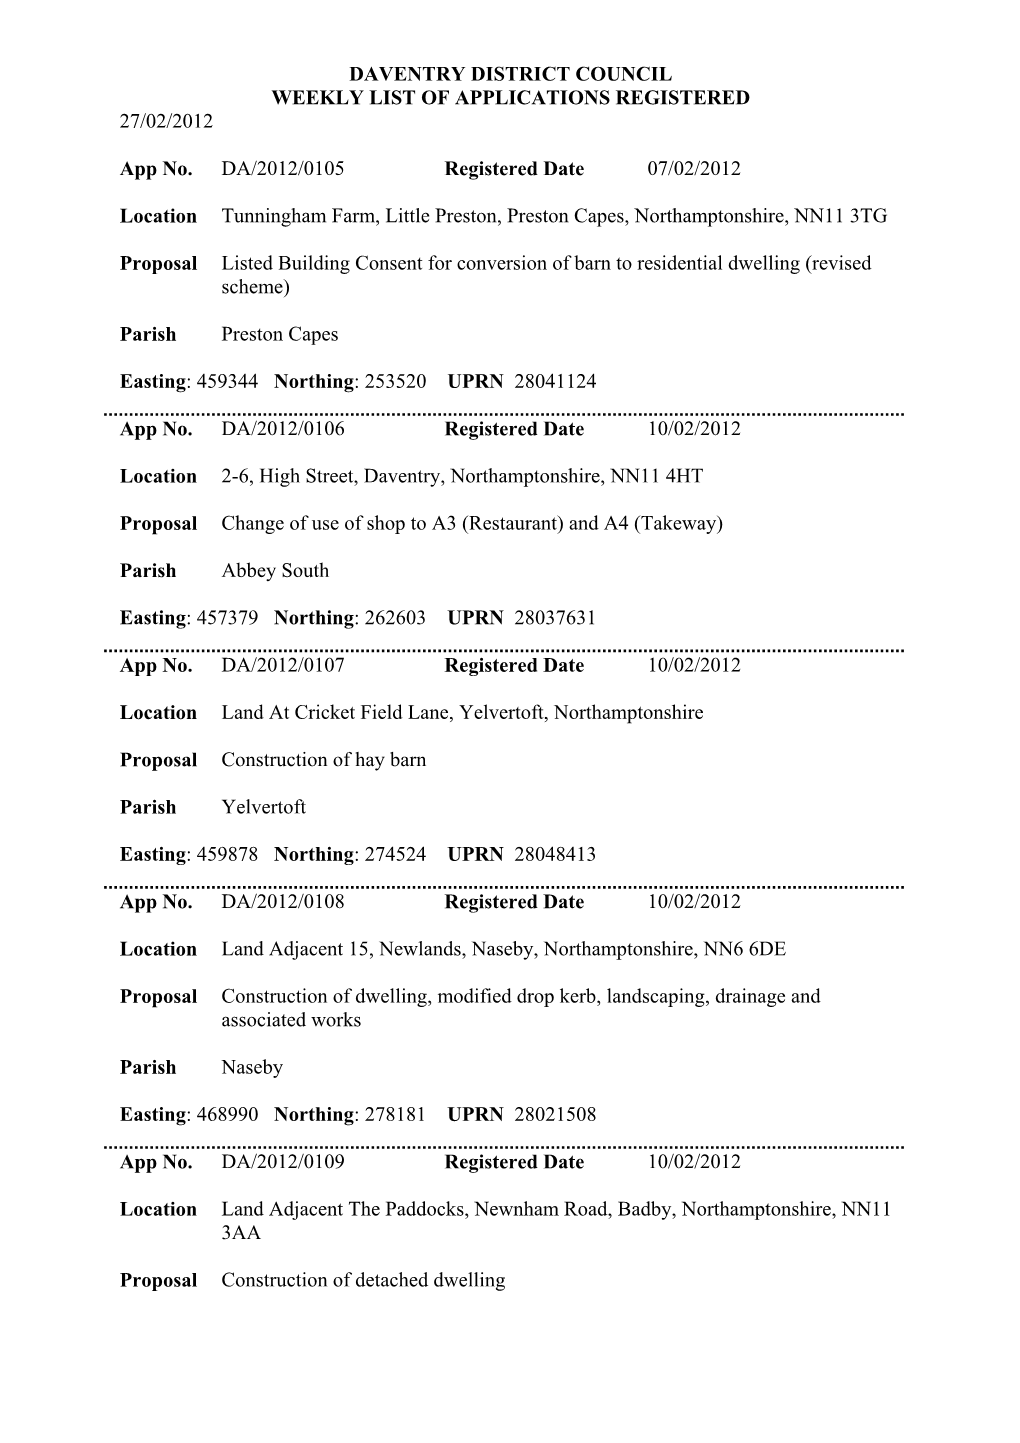 DAVENTRY DISTRICT COUNCIL WEEKLY LIST of APPLICATIONS REGISTERED 27/02/2012 App No. DA/2012/0105 Registered Date 07/02/2012 Loca